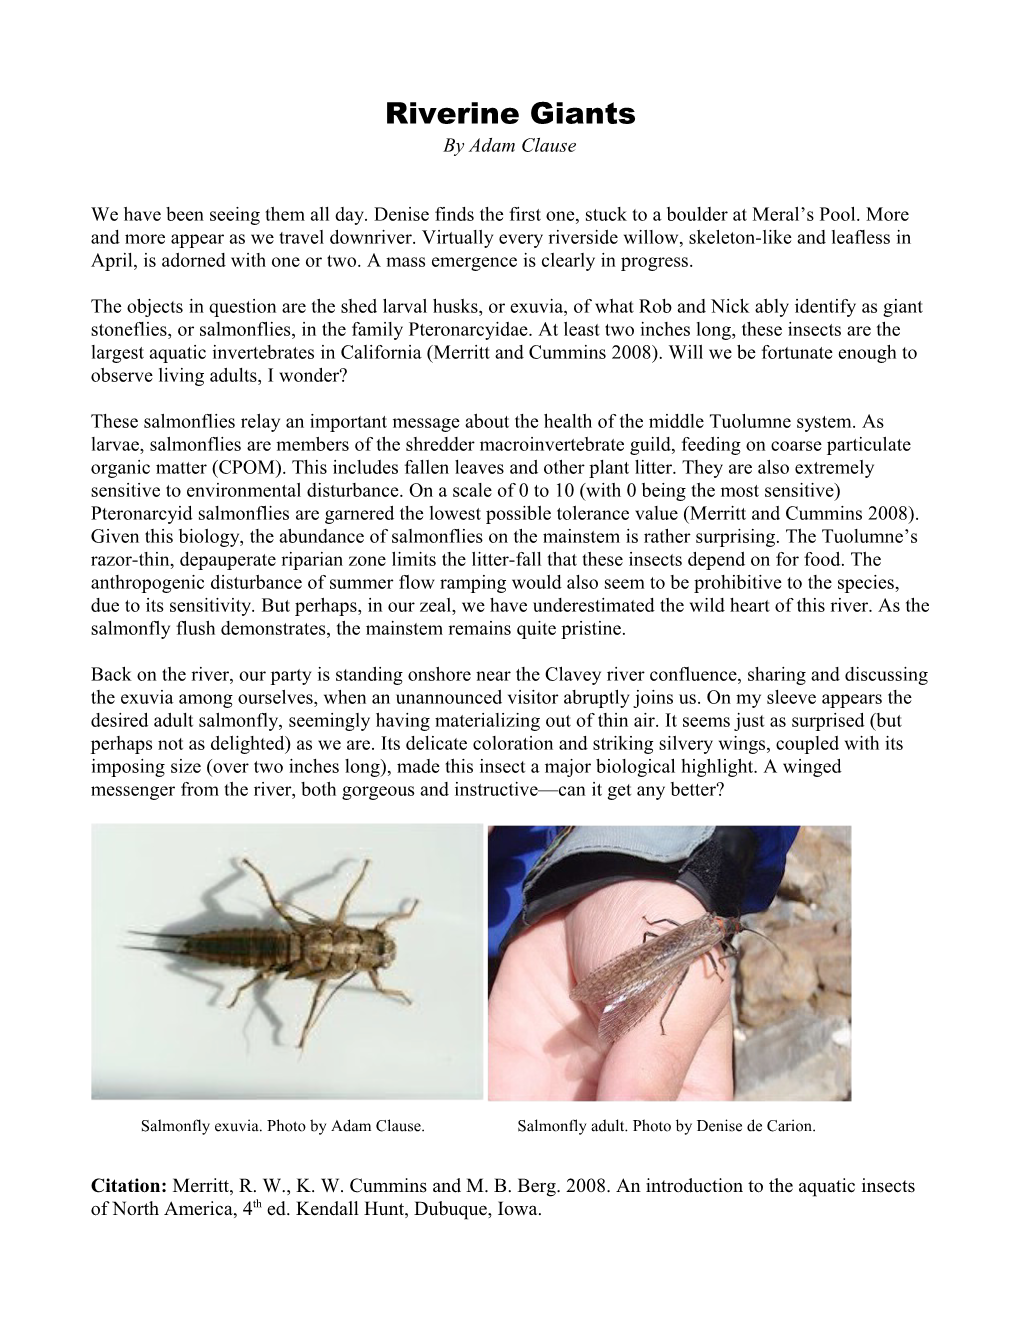 As I Would Learn Later, These Salmonflies Relay an Important Message About the Health Of